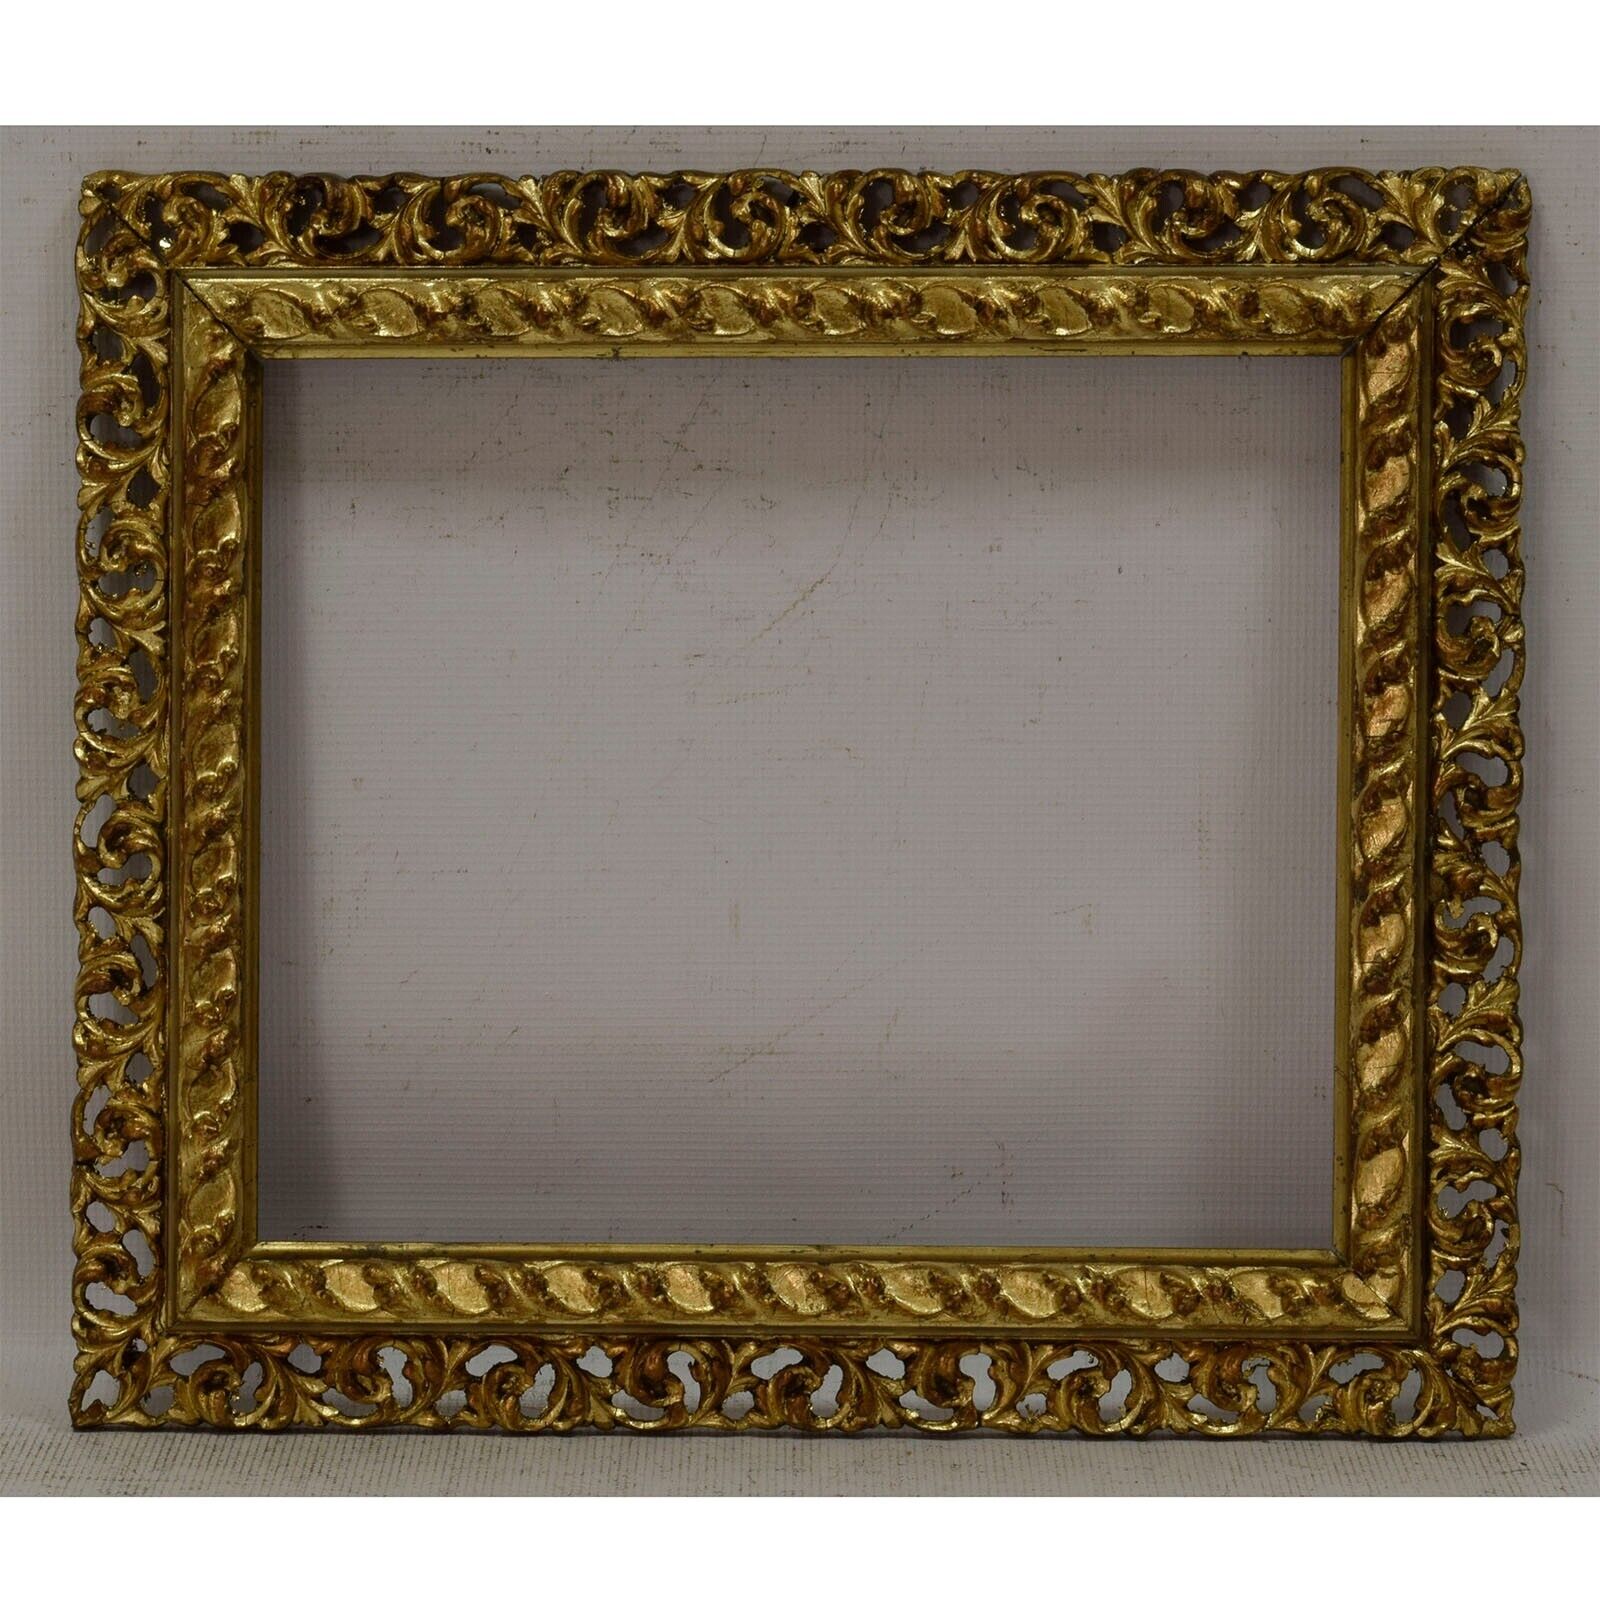 Ca. 1880-1900 wooden painting frame with metal leaf dimensions 14.4 x 12 in